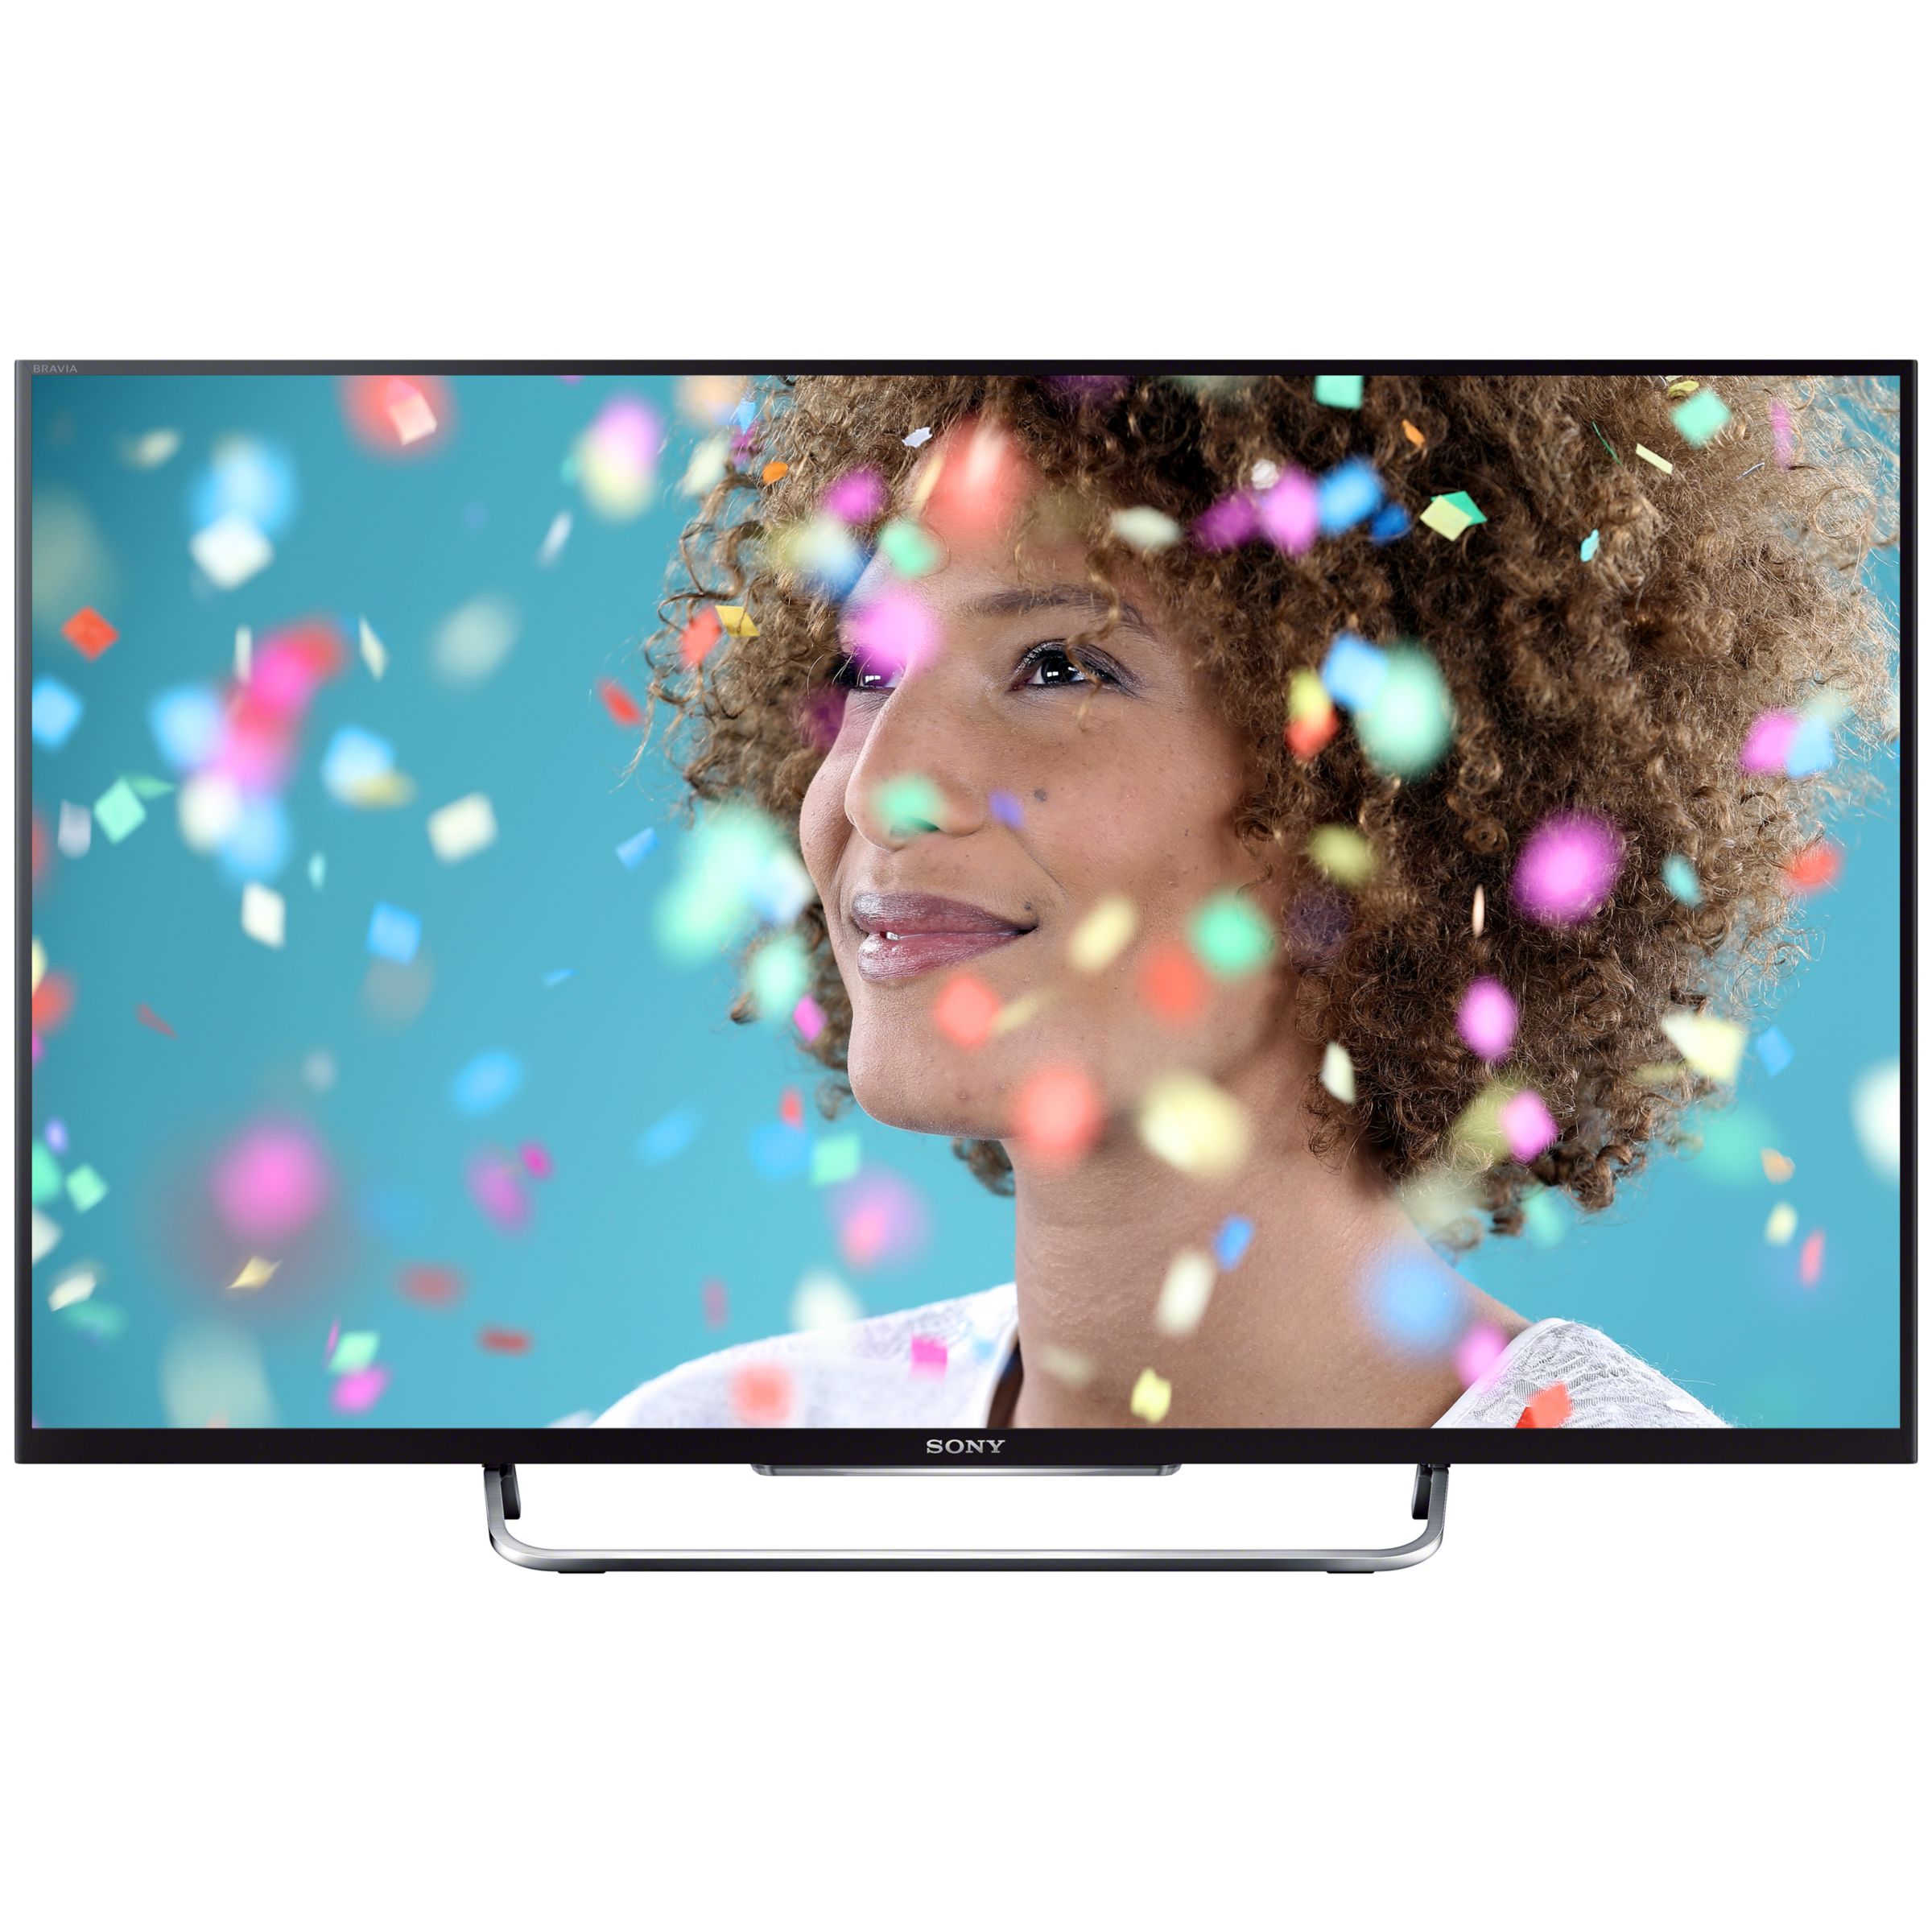 Sony Bravia KDL32W7 LED HD 1080p Smart TV, 32" with Freeview HD,